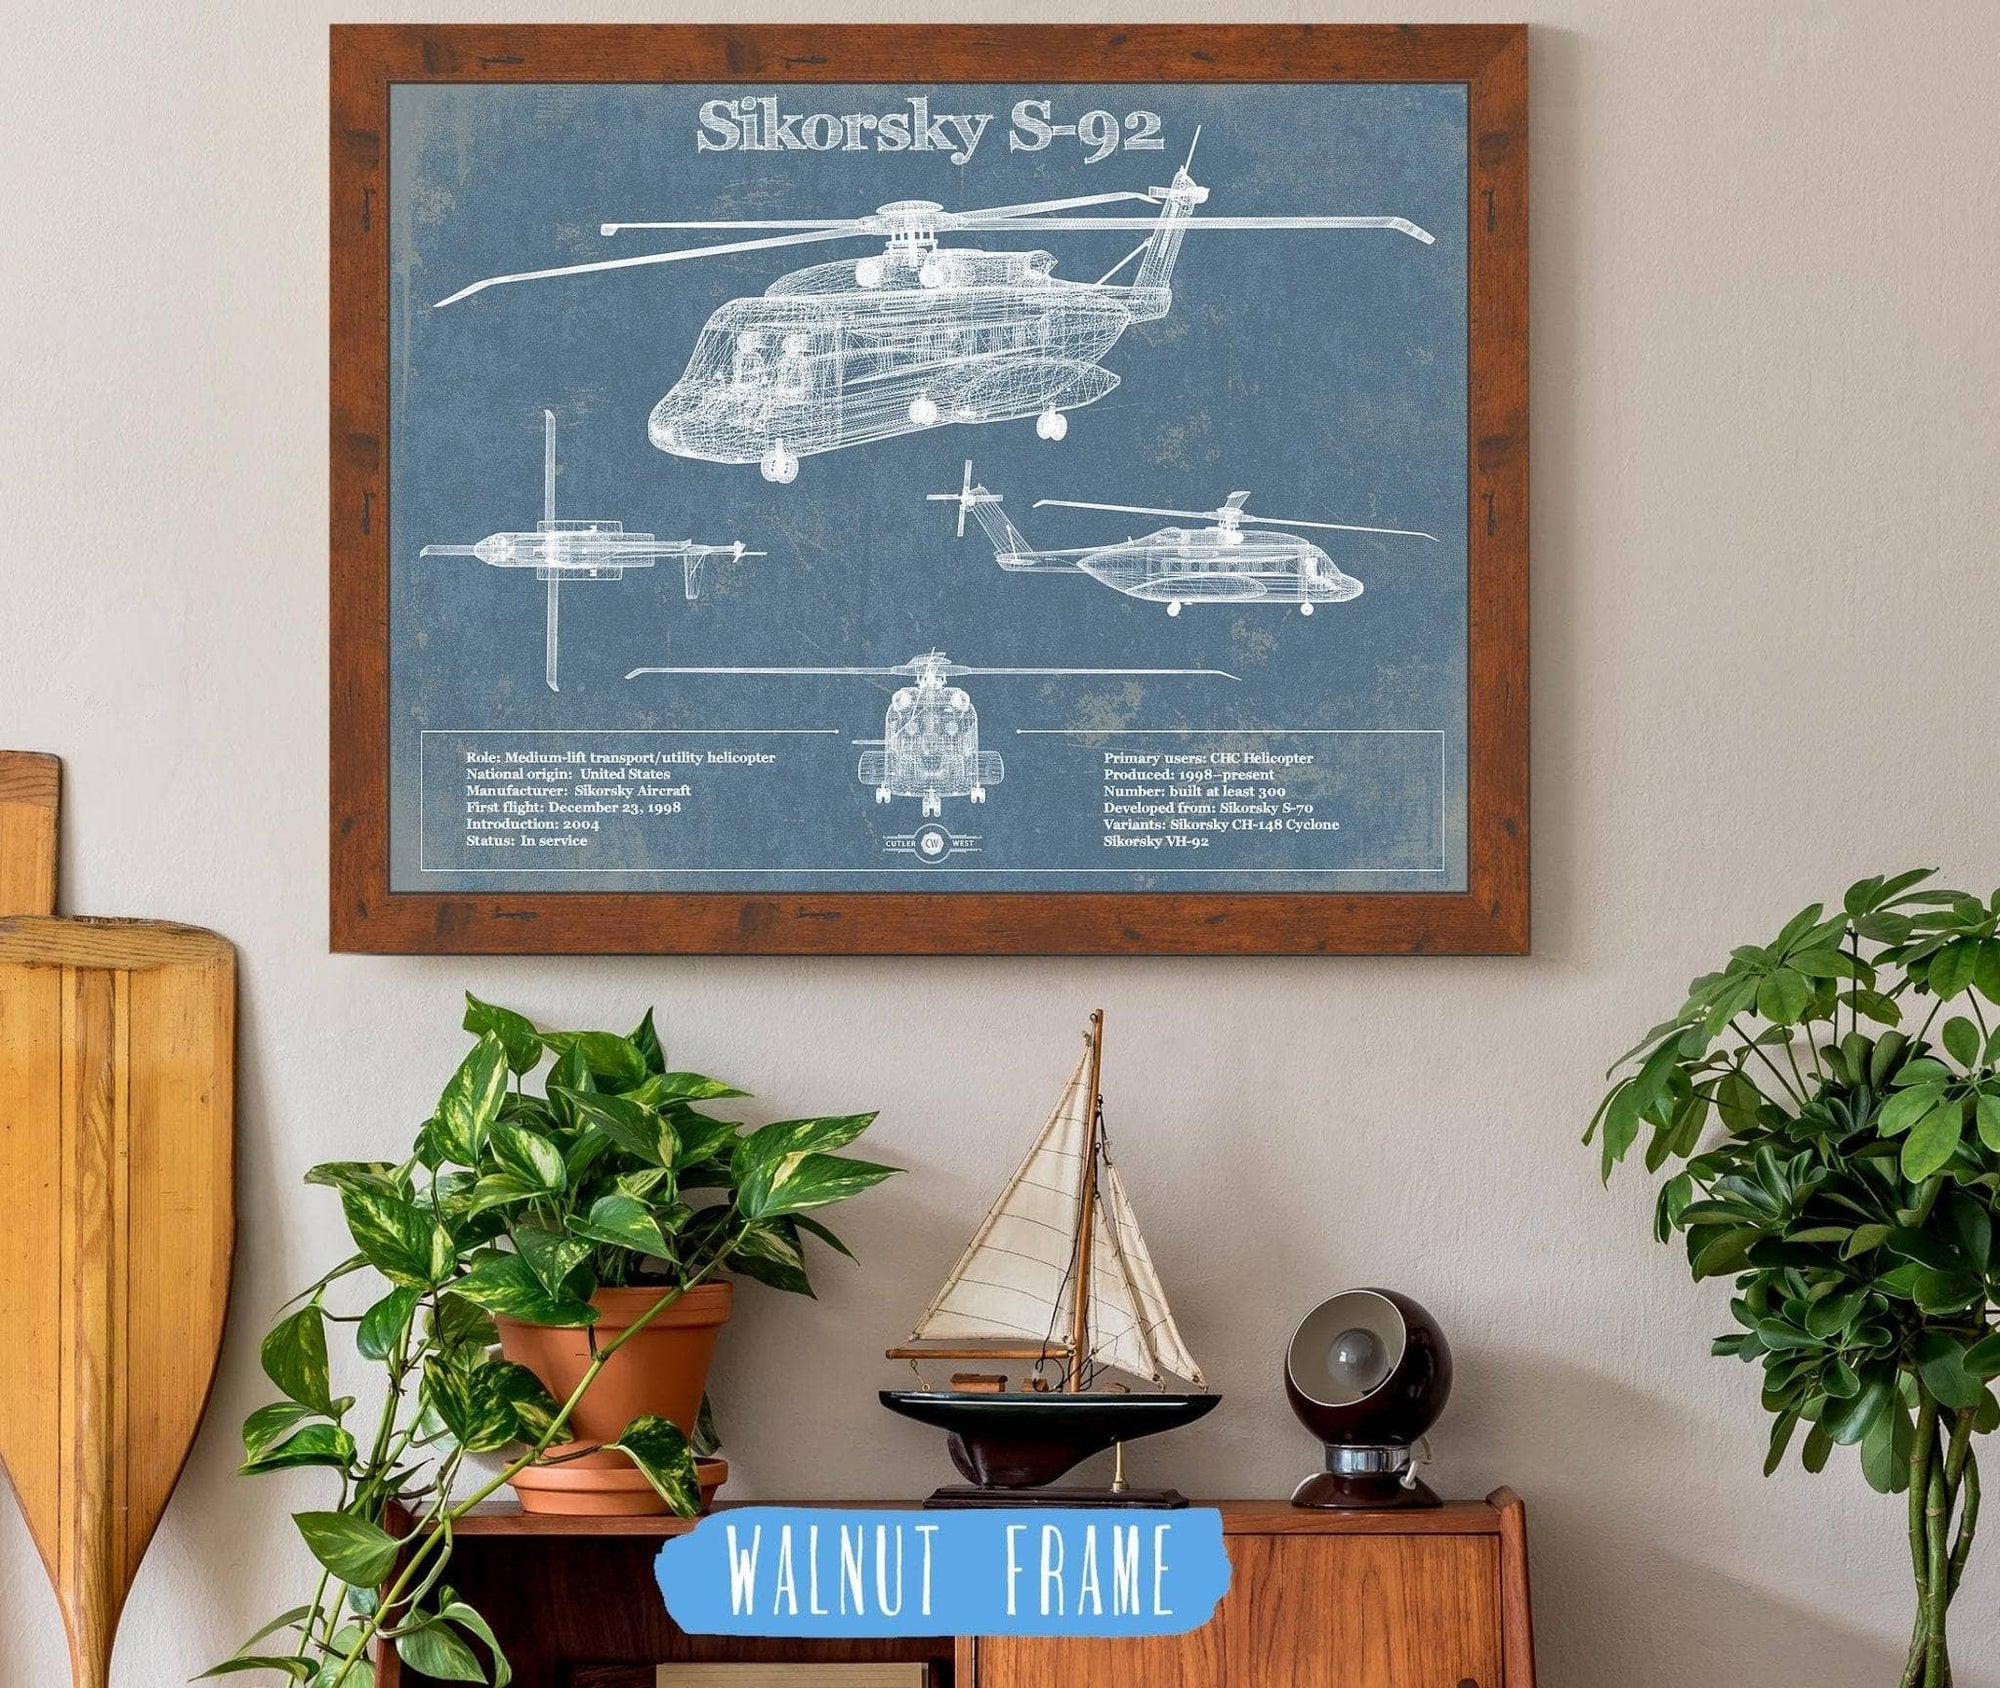 Cutler West Military Aircraft 14" x 11" / Walnut Frame Sikorsky S-92 Helicopter Vintage Aviation Blueprint Military Print 833110073_19849